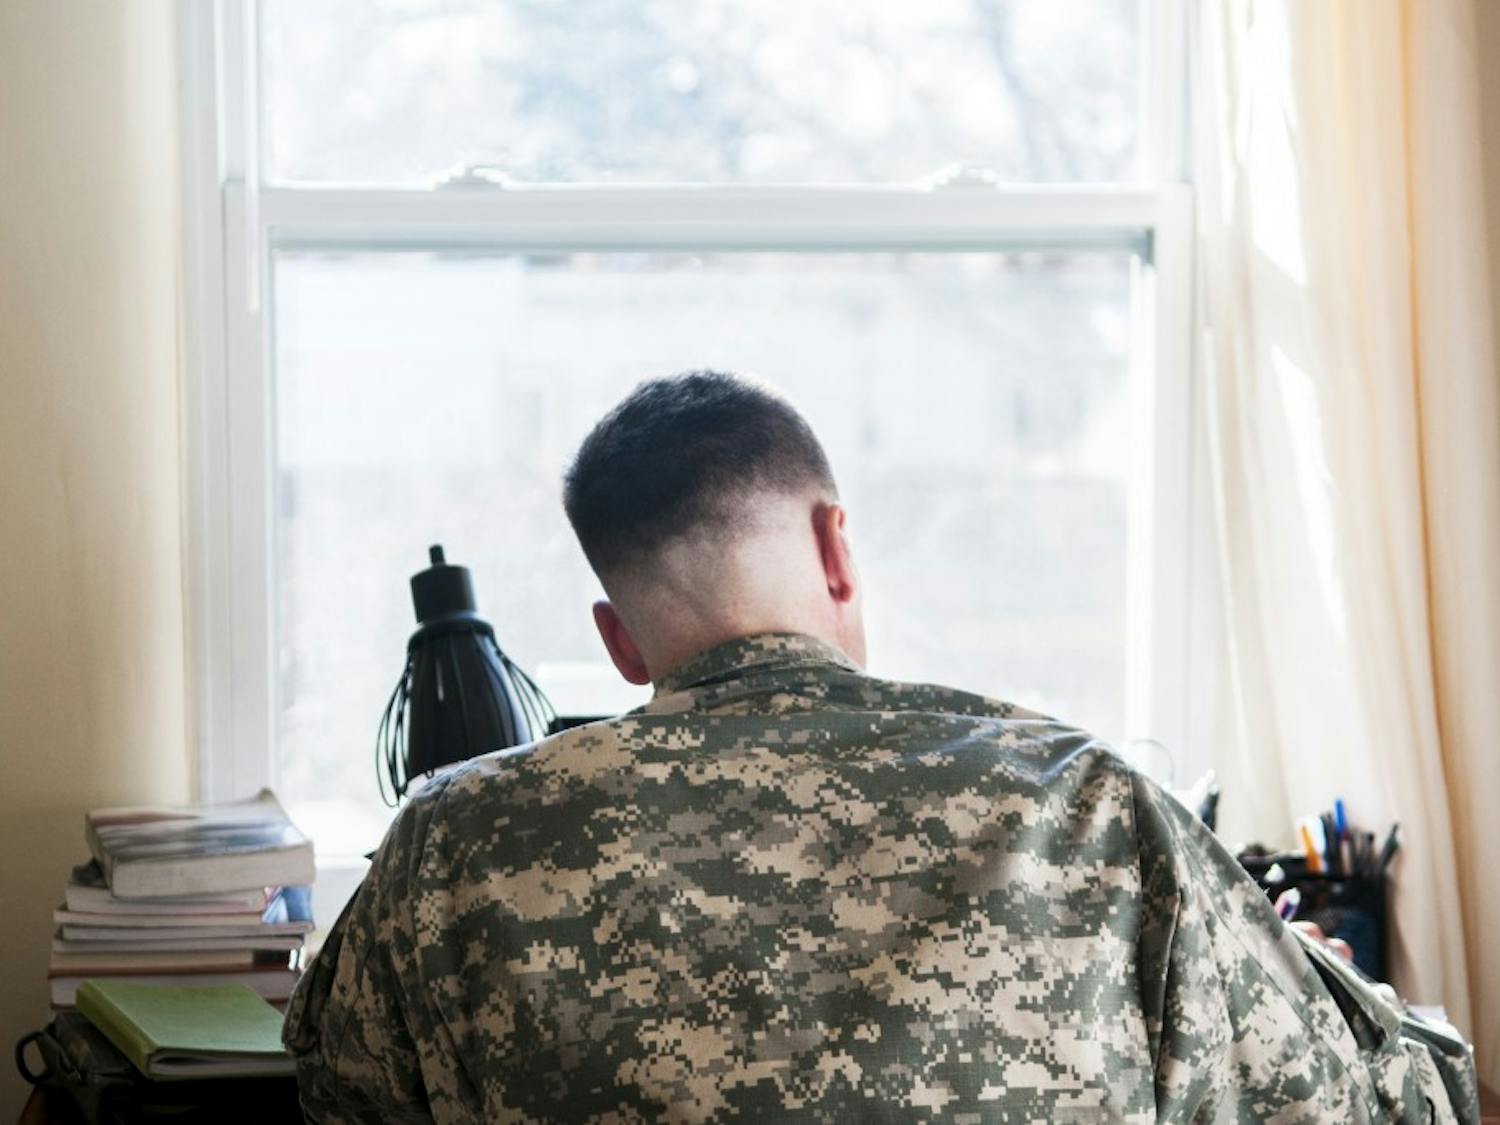 David Dobbs, a U.S. Army veteran who has served three tours in Afghanistan, studies at his home in Albuquerque on Wednesday evening. Dobbs is a graduate student studying public administration, and he utilizes UNM's Green to Gold program to get through school.&nbsp;